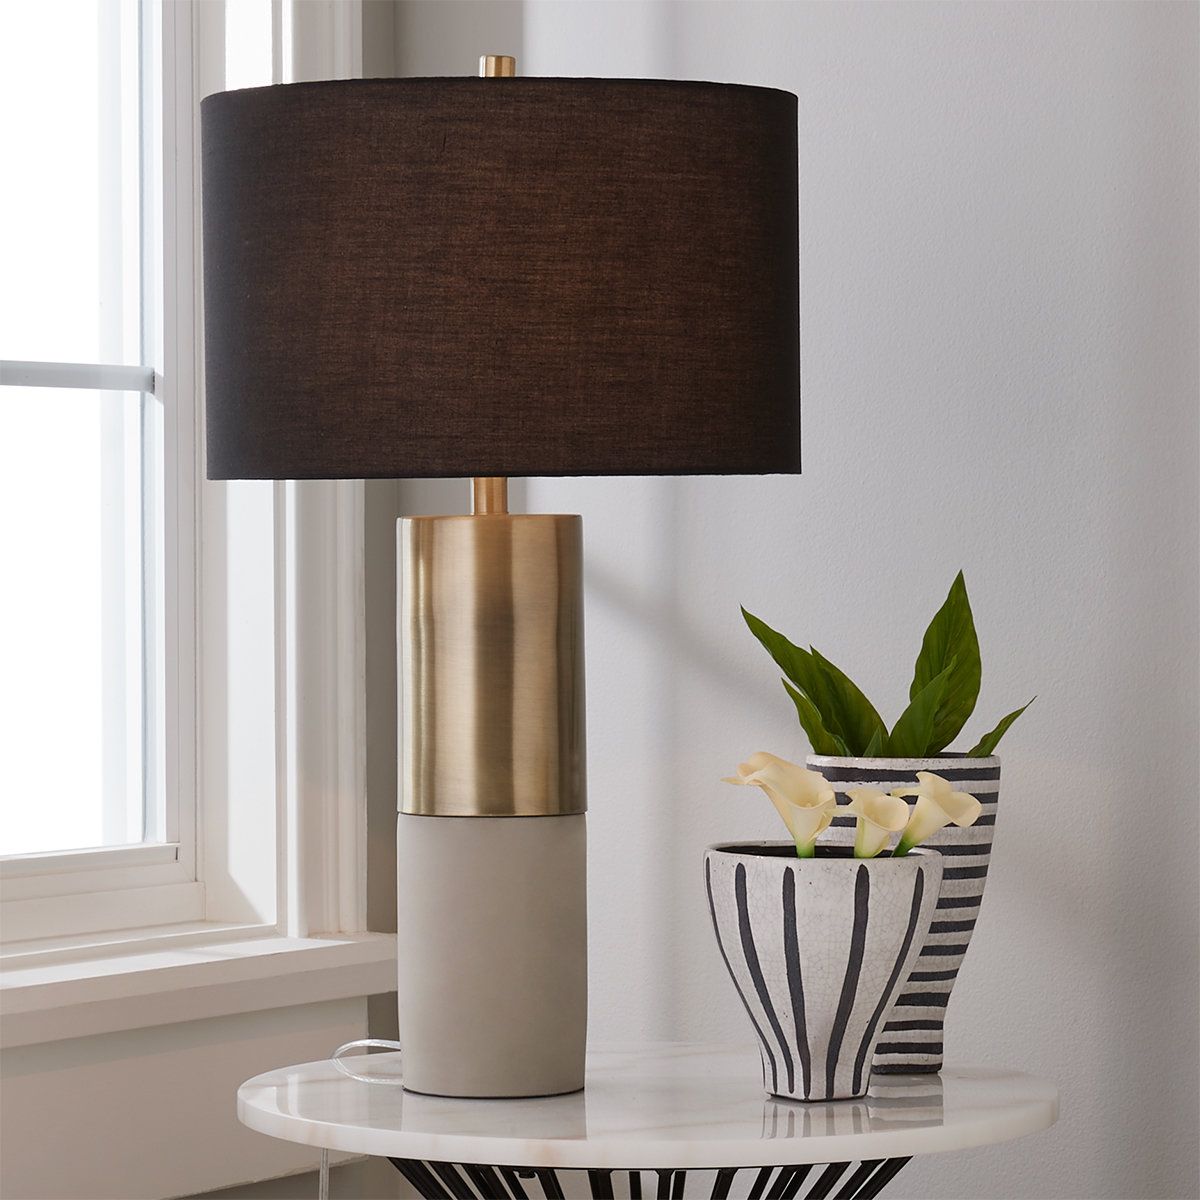 Create an Elegant Atmosphere with a Lampshade